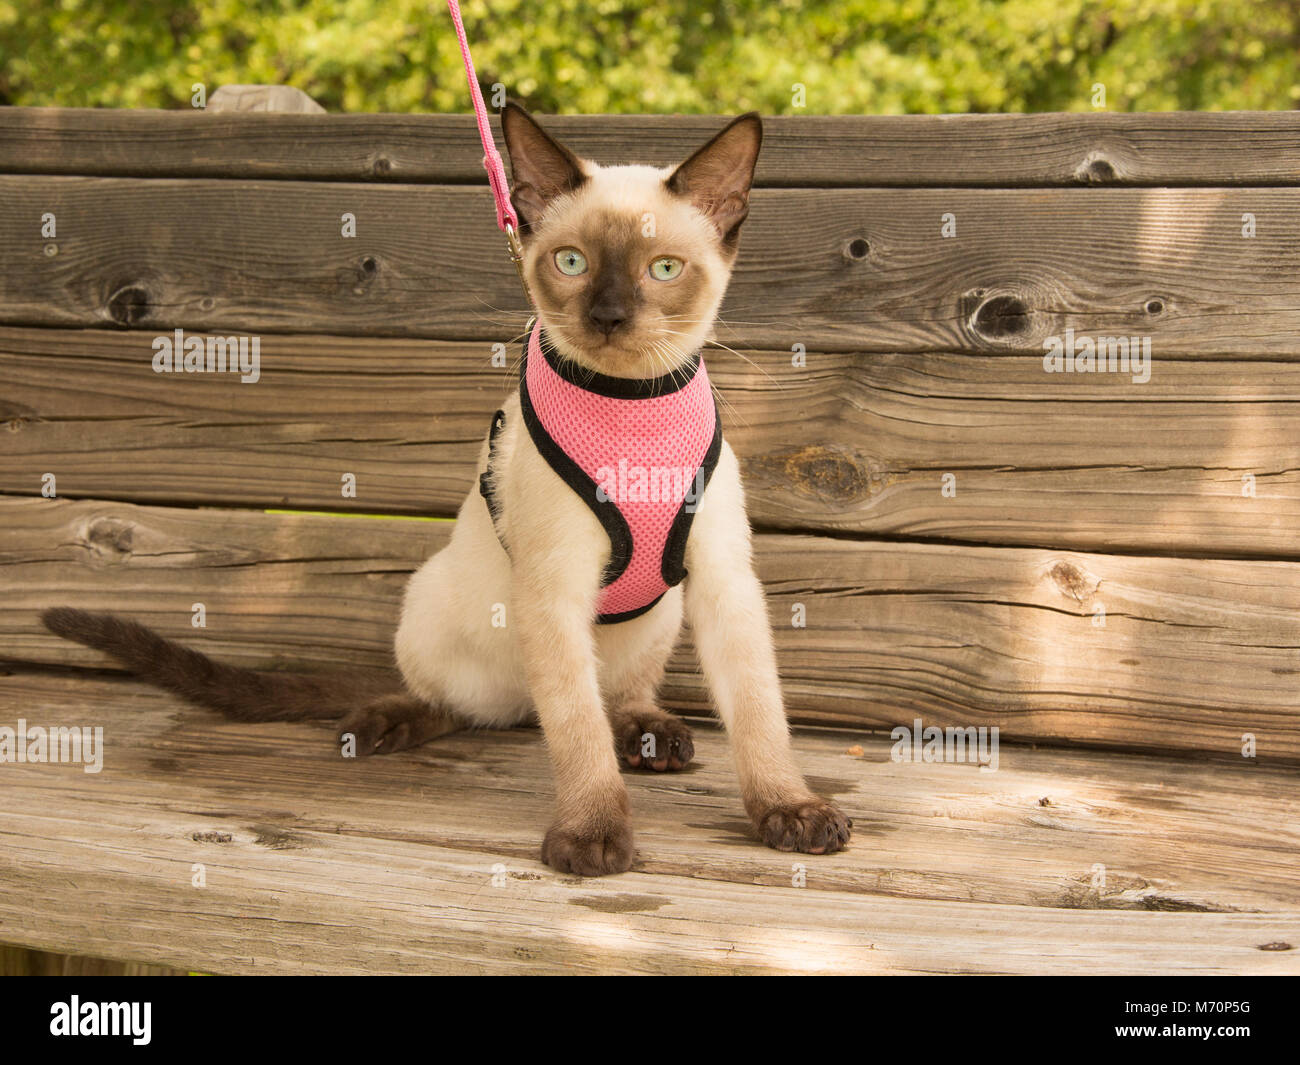 Young Siamese cat in a pink harness sitting on a wooden bench in the shade of a tree, looking at the viewer Stock Photo